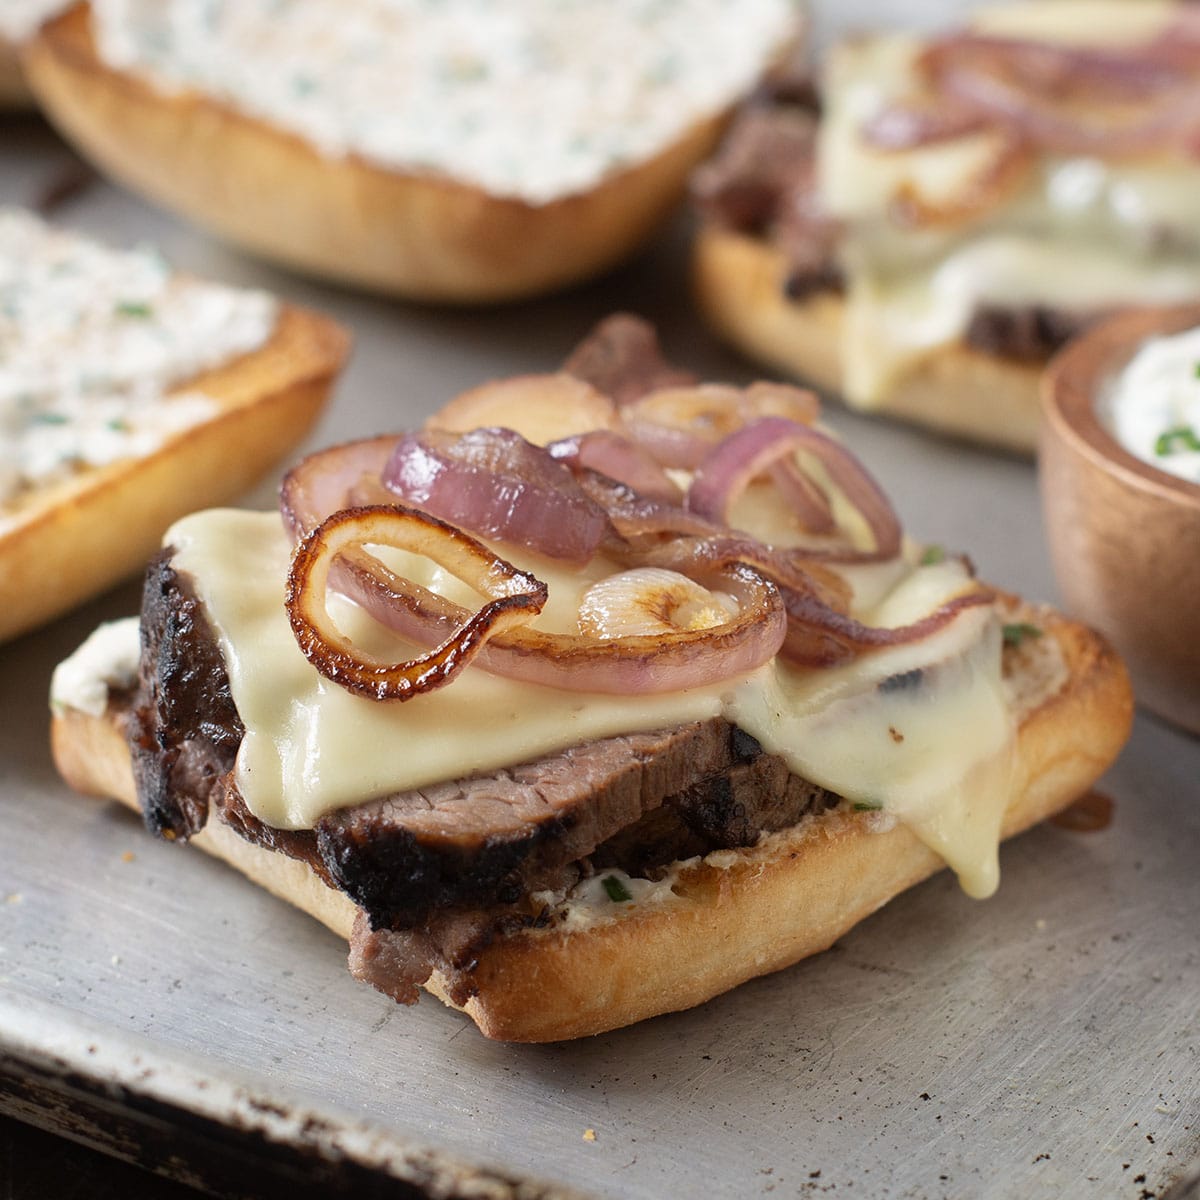 Tri-tip sandwich on a ciabatta roll with melty cheese and browned red onion slices.